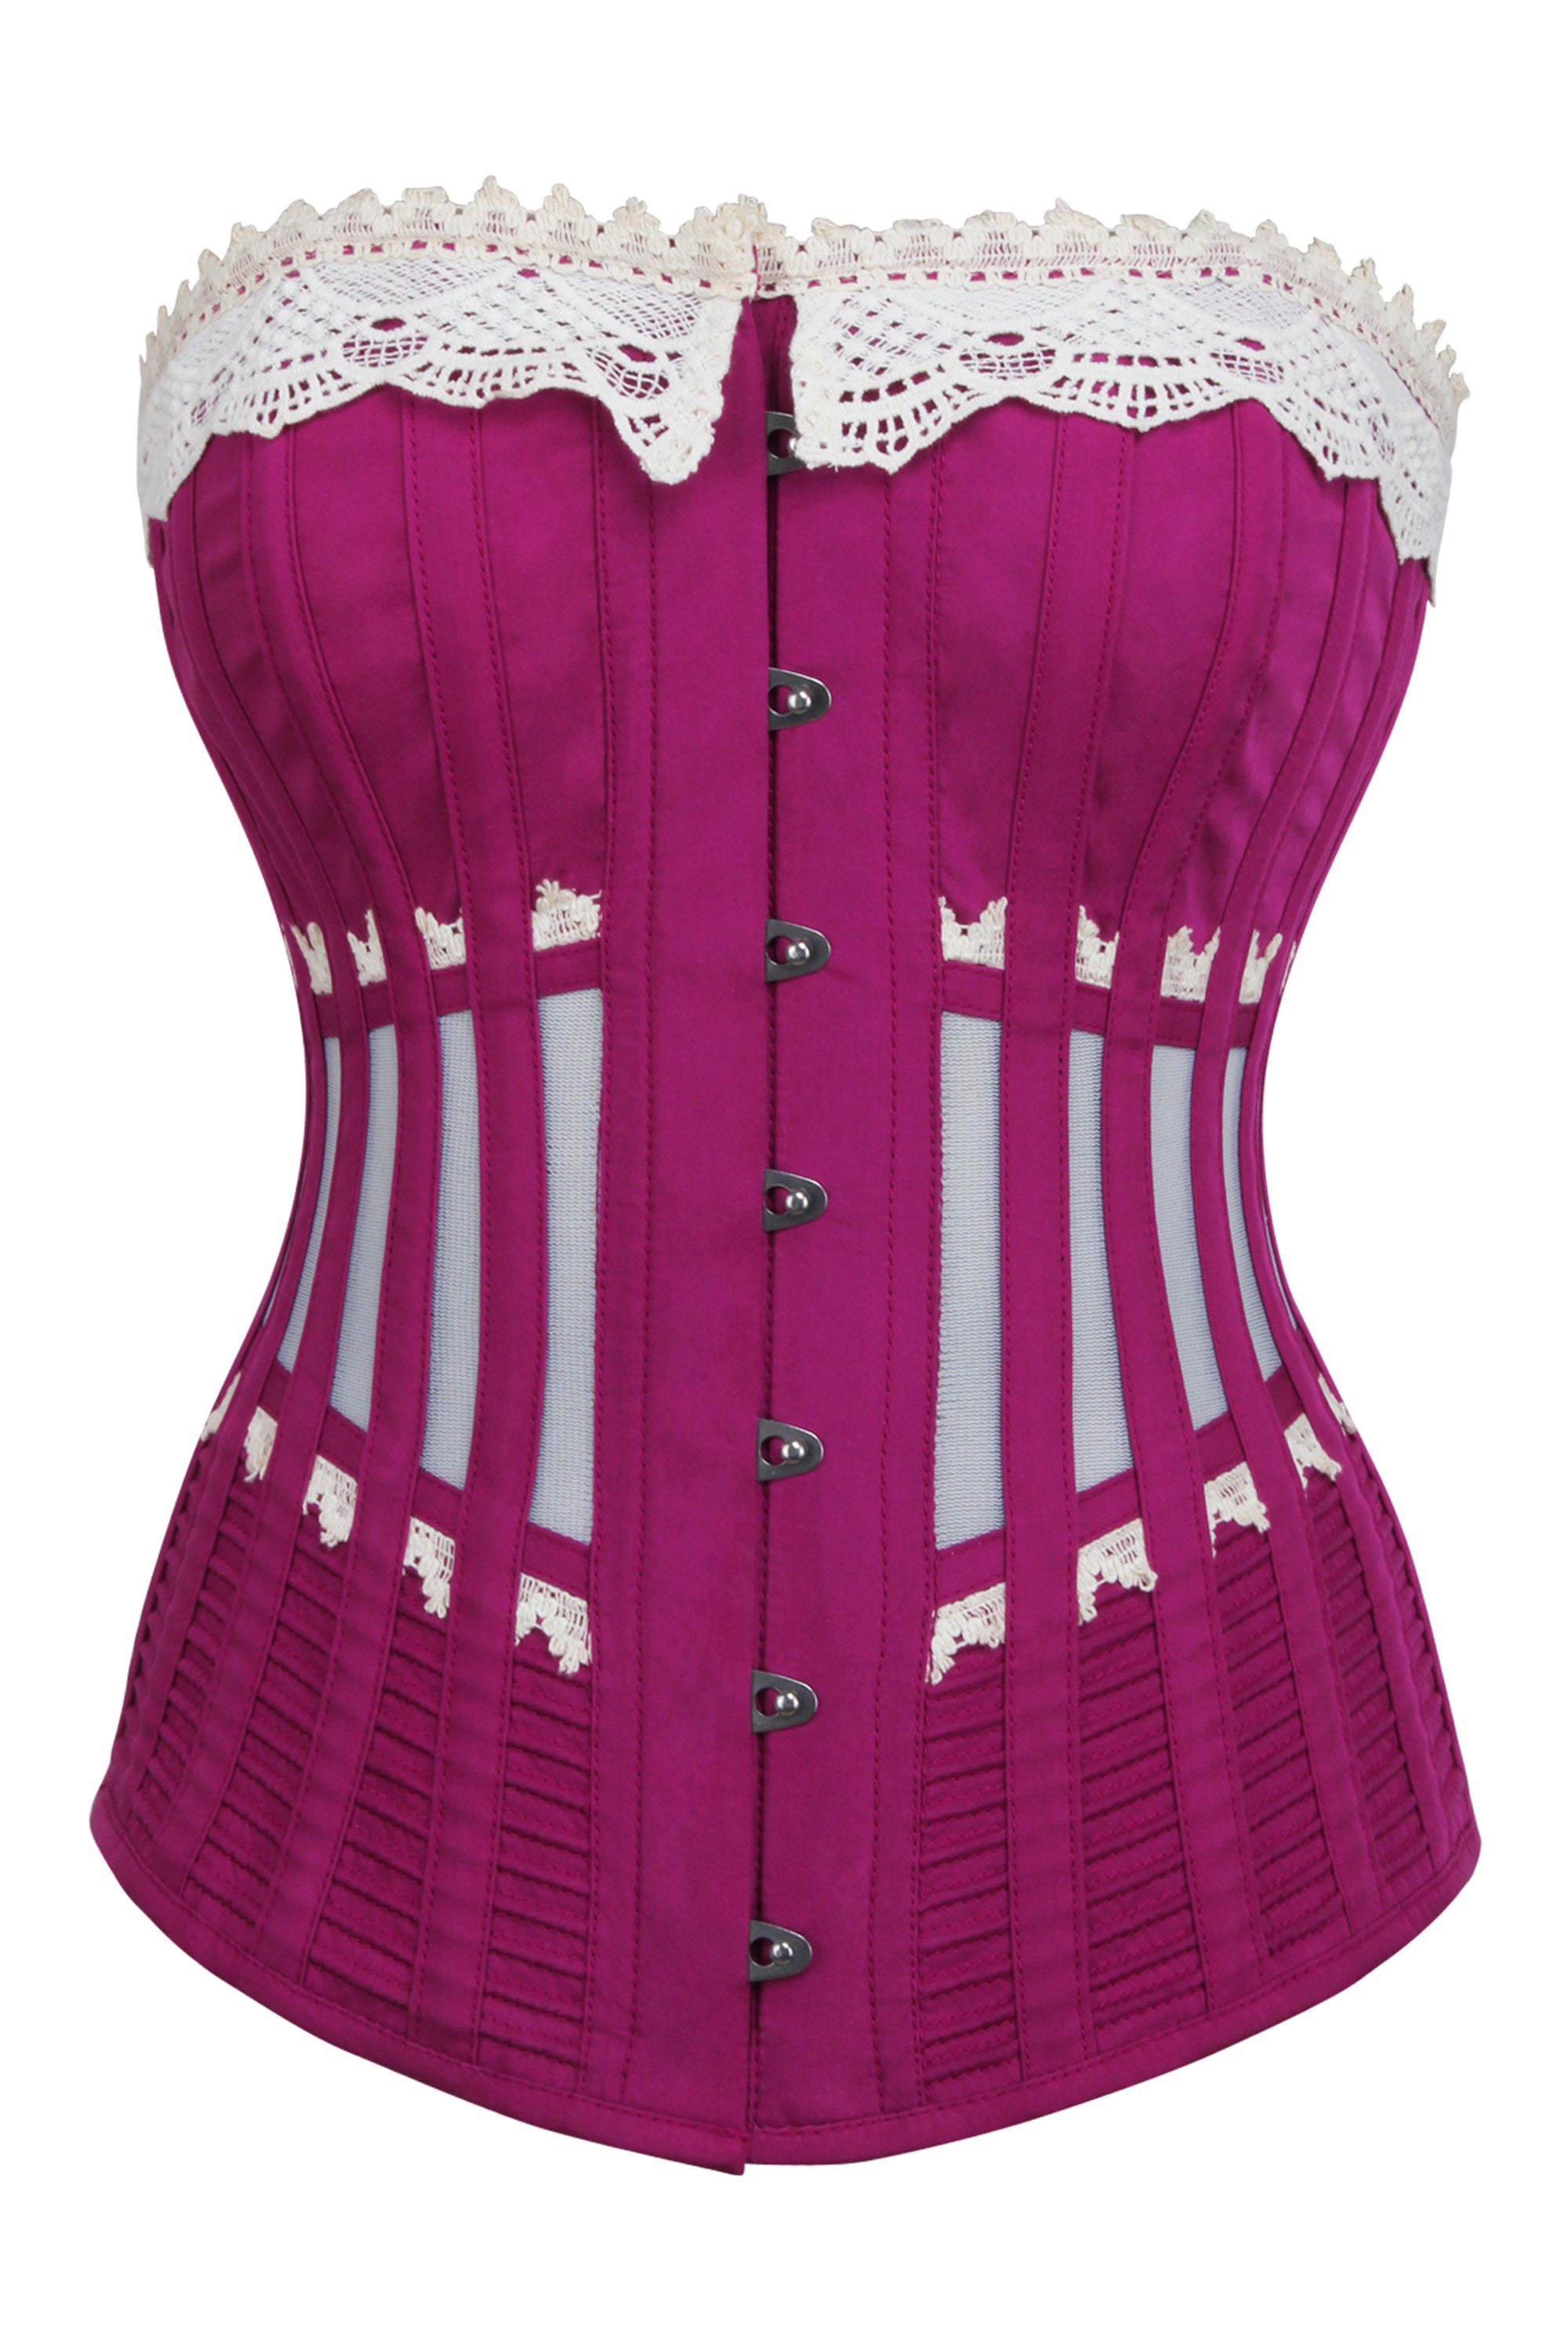 Burlesque Corsets & Corset Tops For Waist Training and more- True Corset